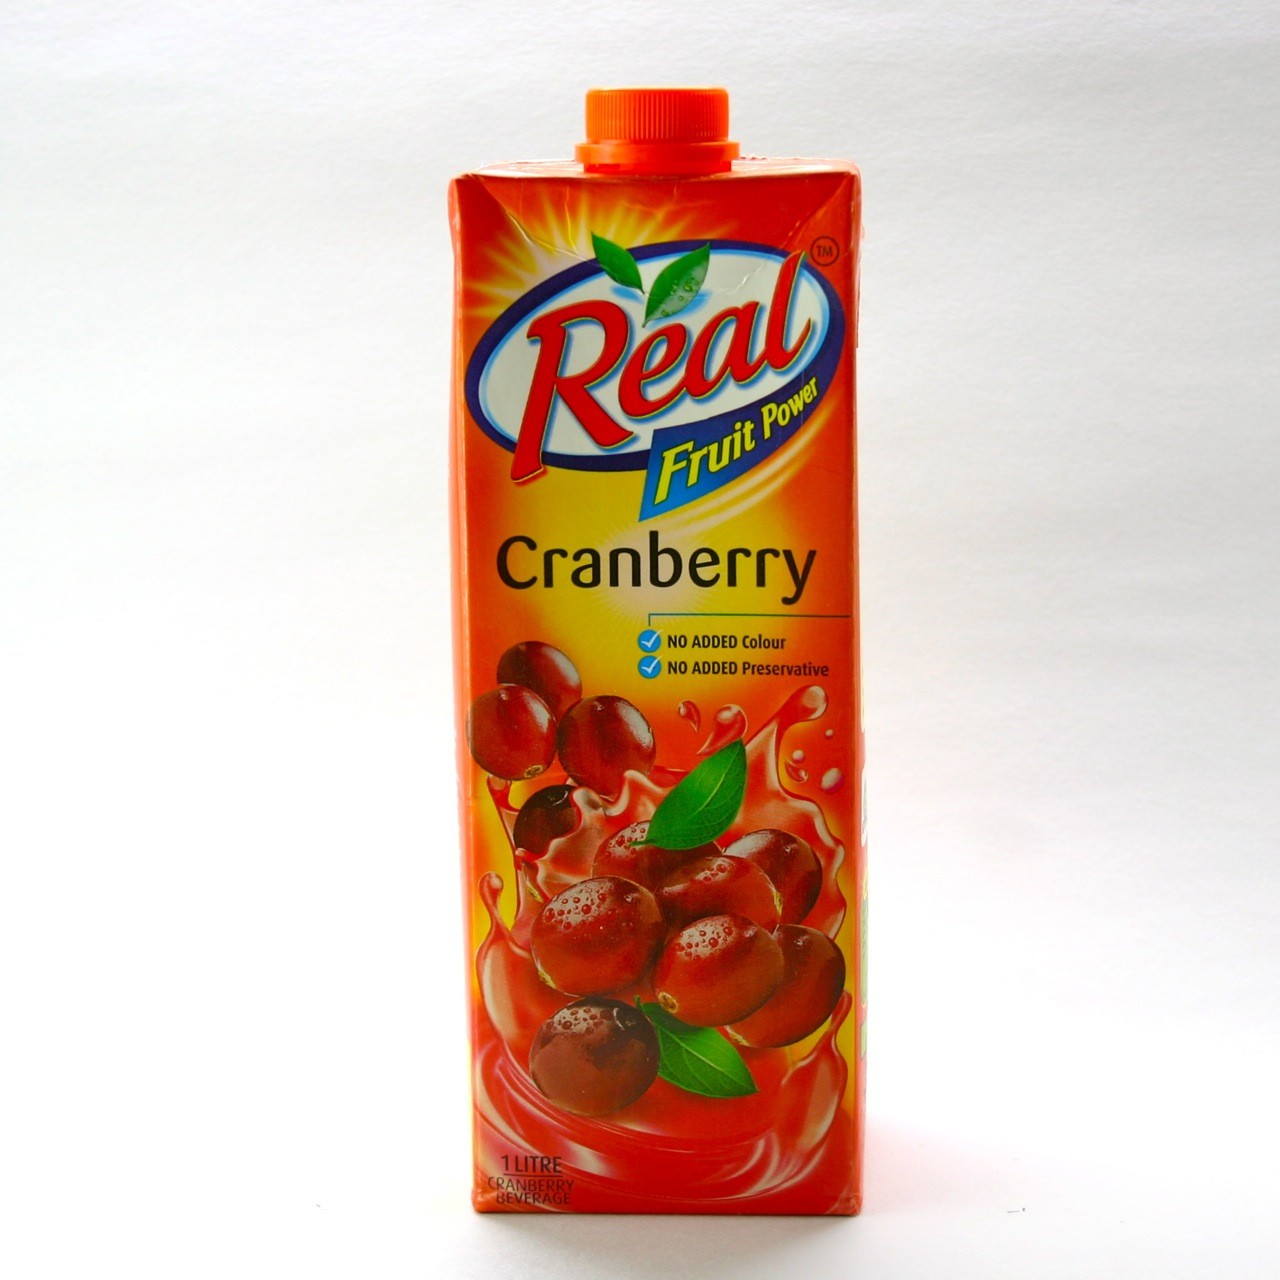 Real Fruit Power Juice - Cranberry 1 lt Packing